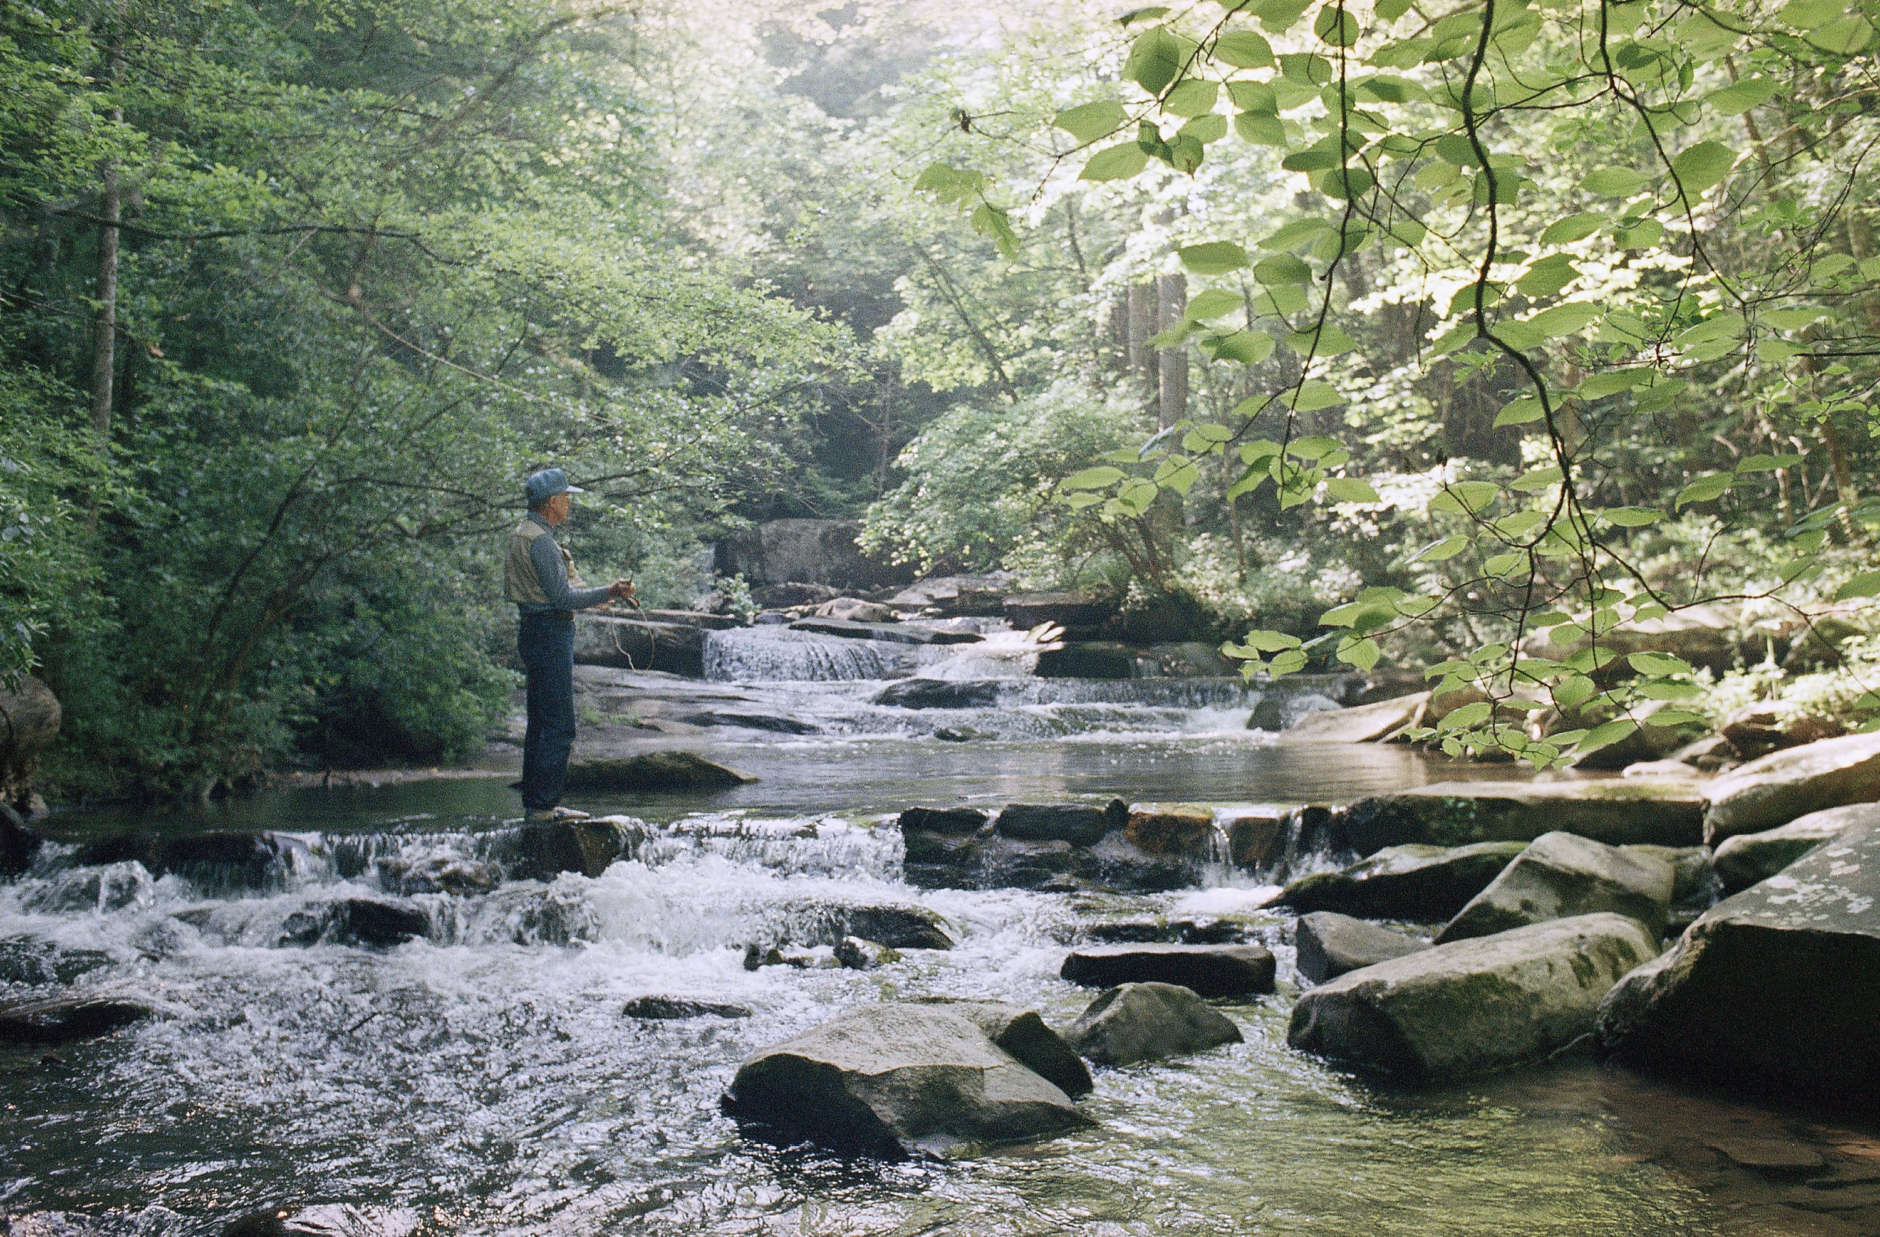 Former President Jimmy Carter fishes in the waters in front of his mountain cabin at Ellijay, Georgia, in May 1988. (AP Photo/Joe Holloway, Jr.)